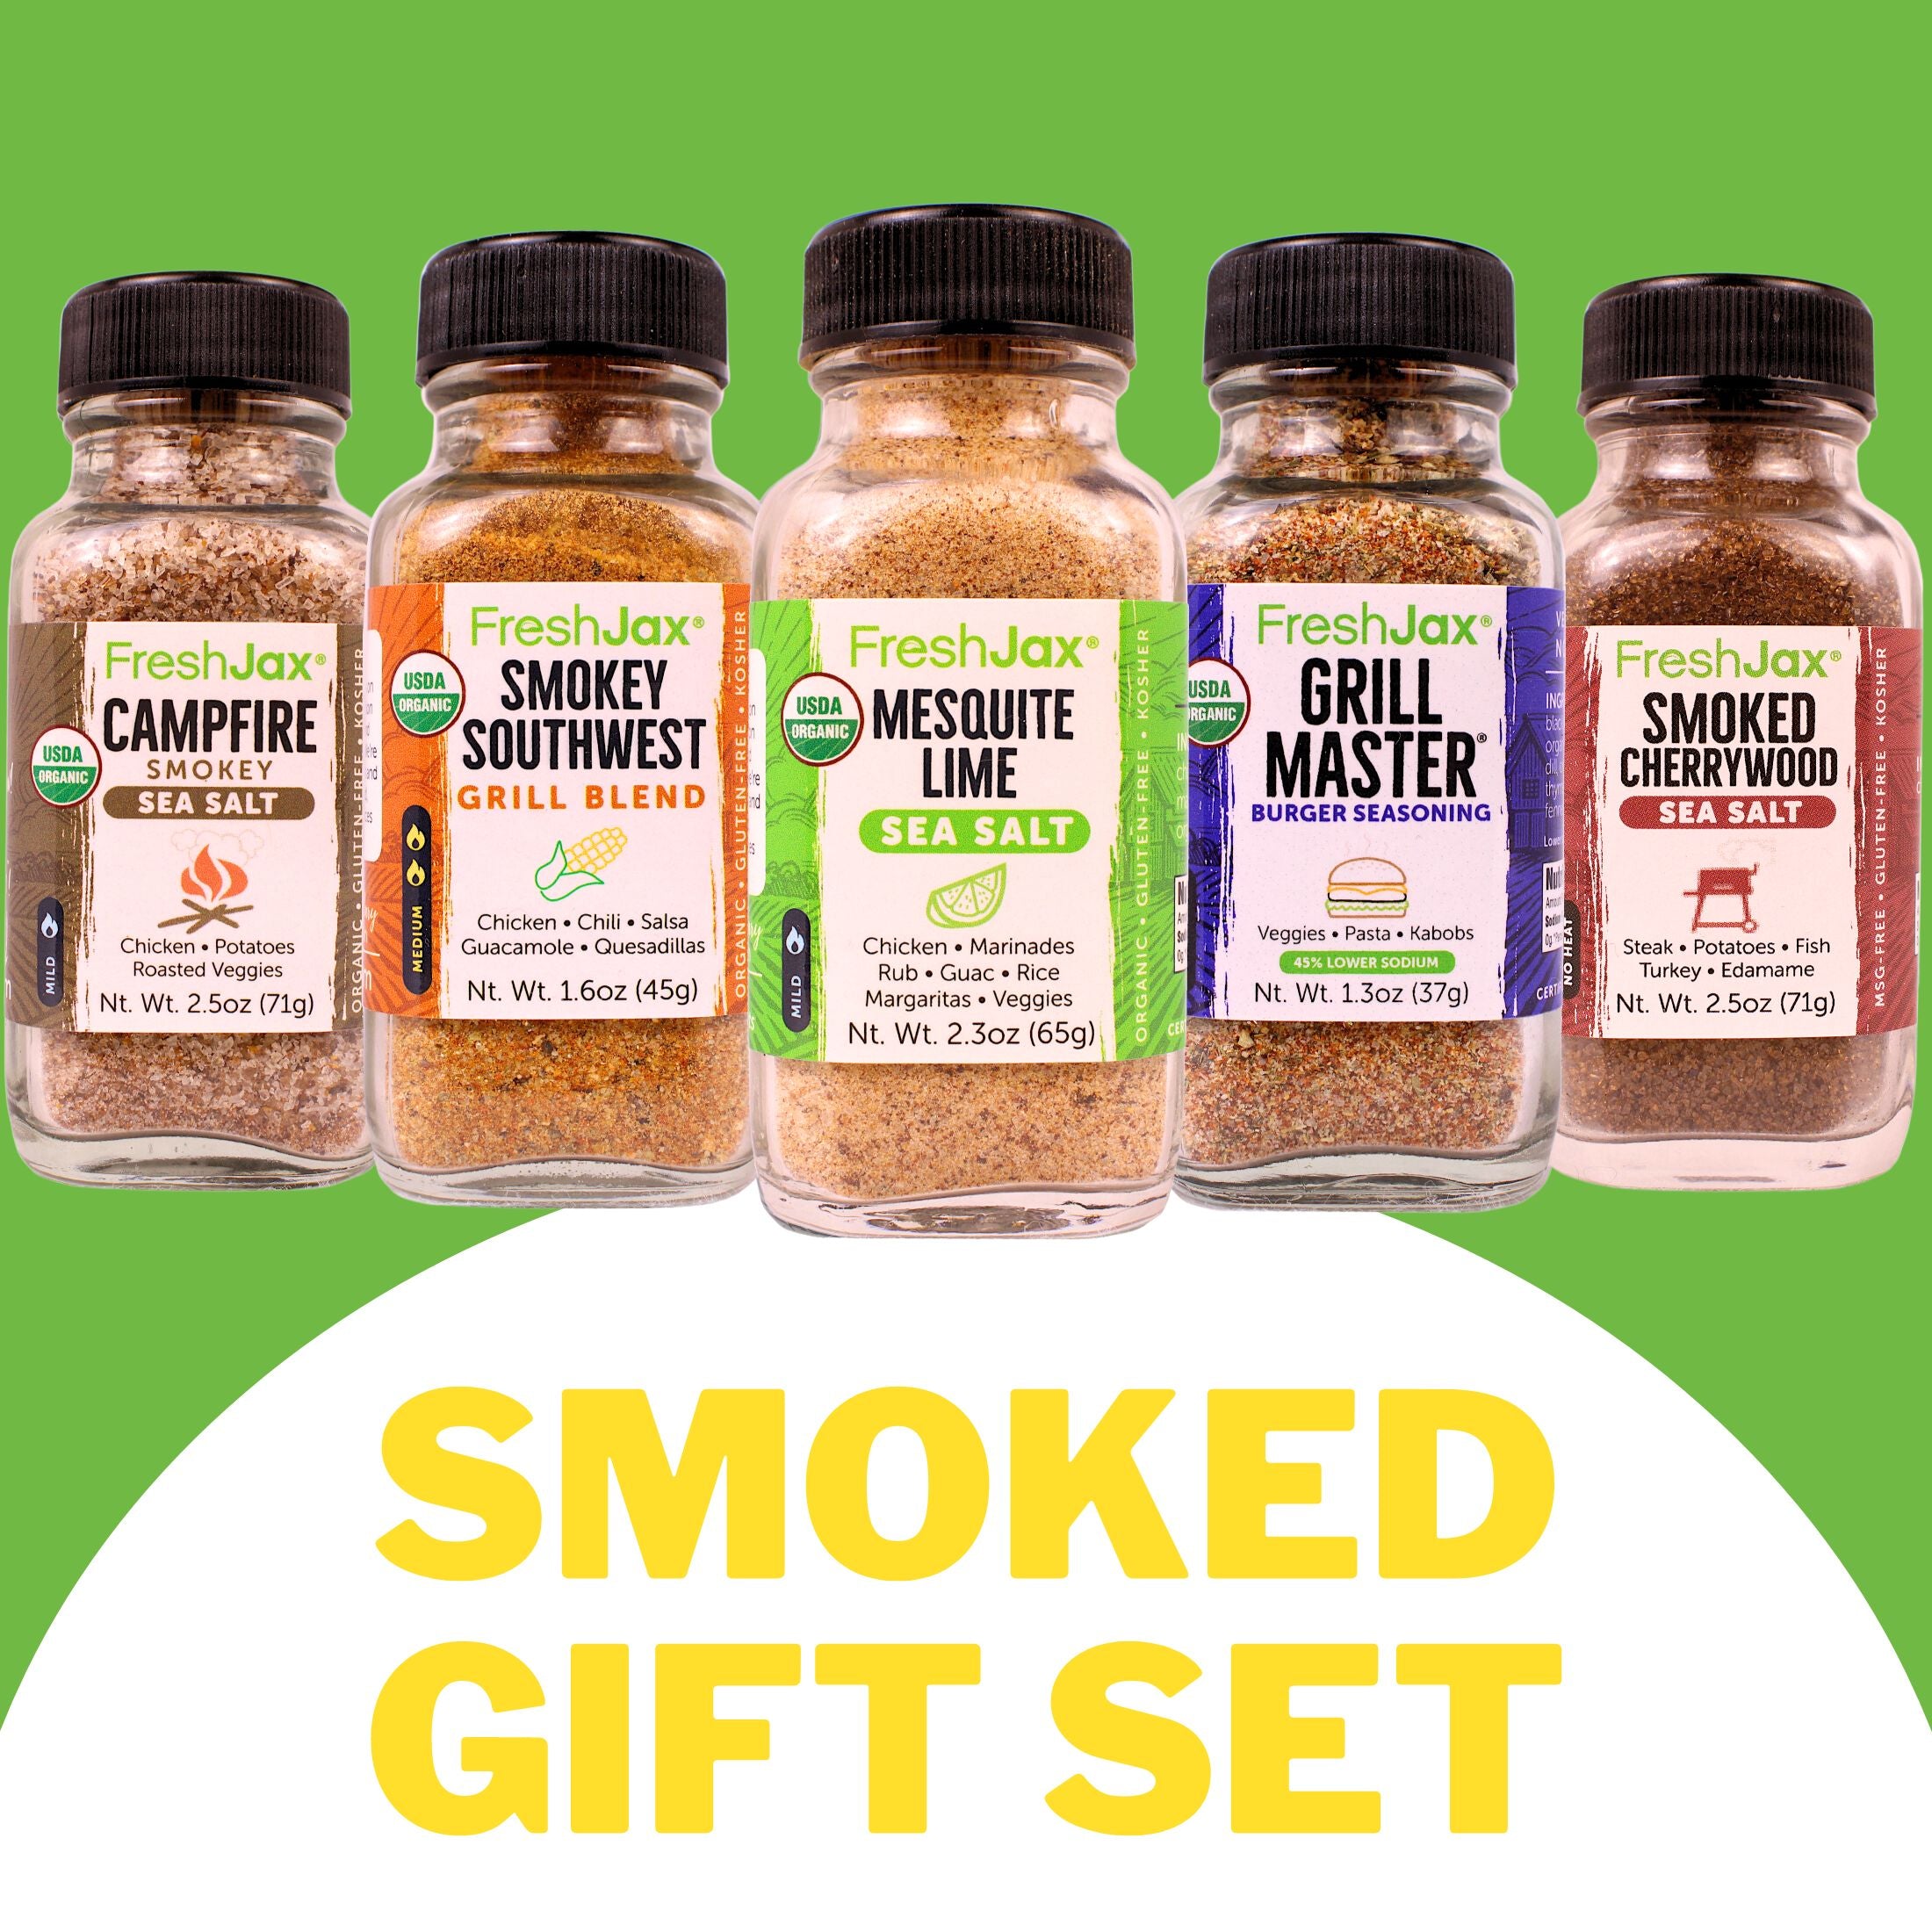 Tasty Seasoning Gift Set by McCormick Spices - 5 Spice Bends